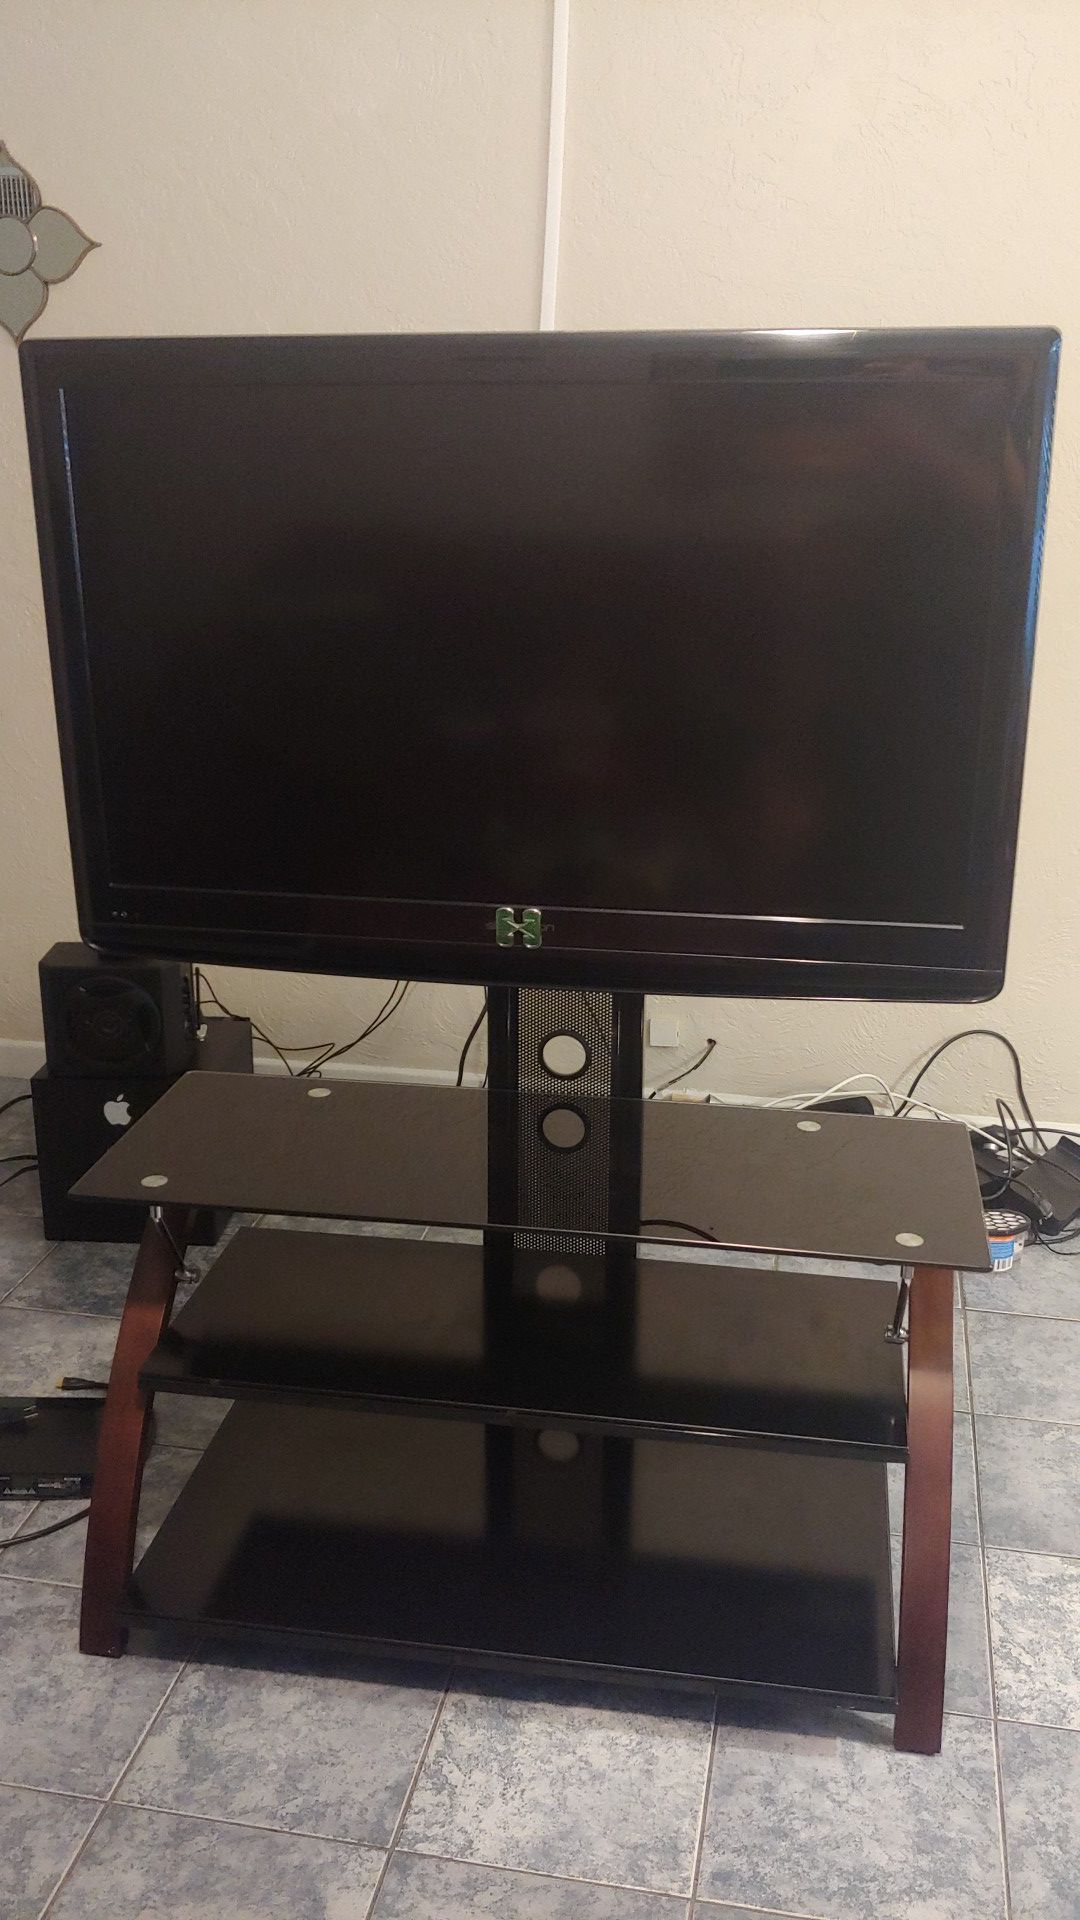 48" TV & stand holds up to 50" TV